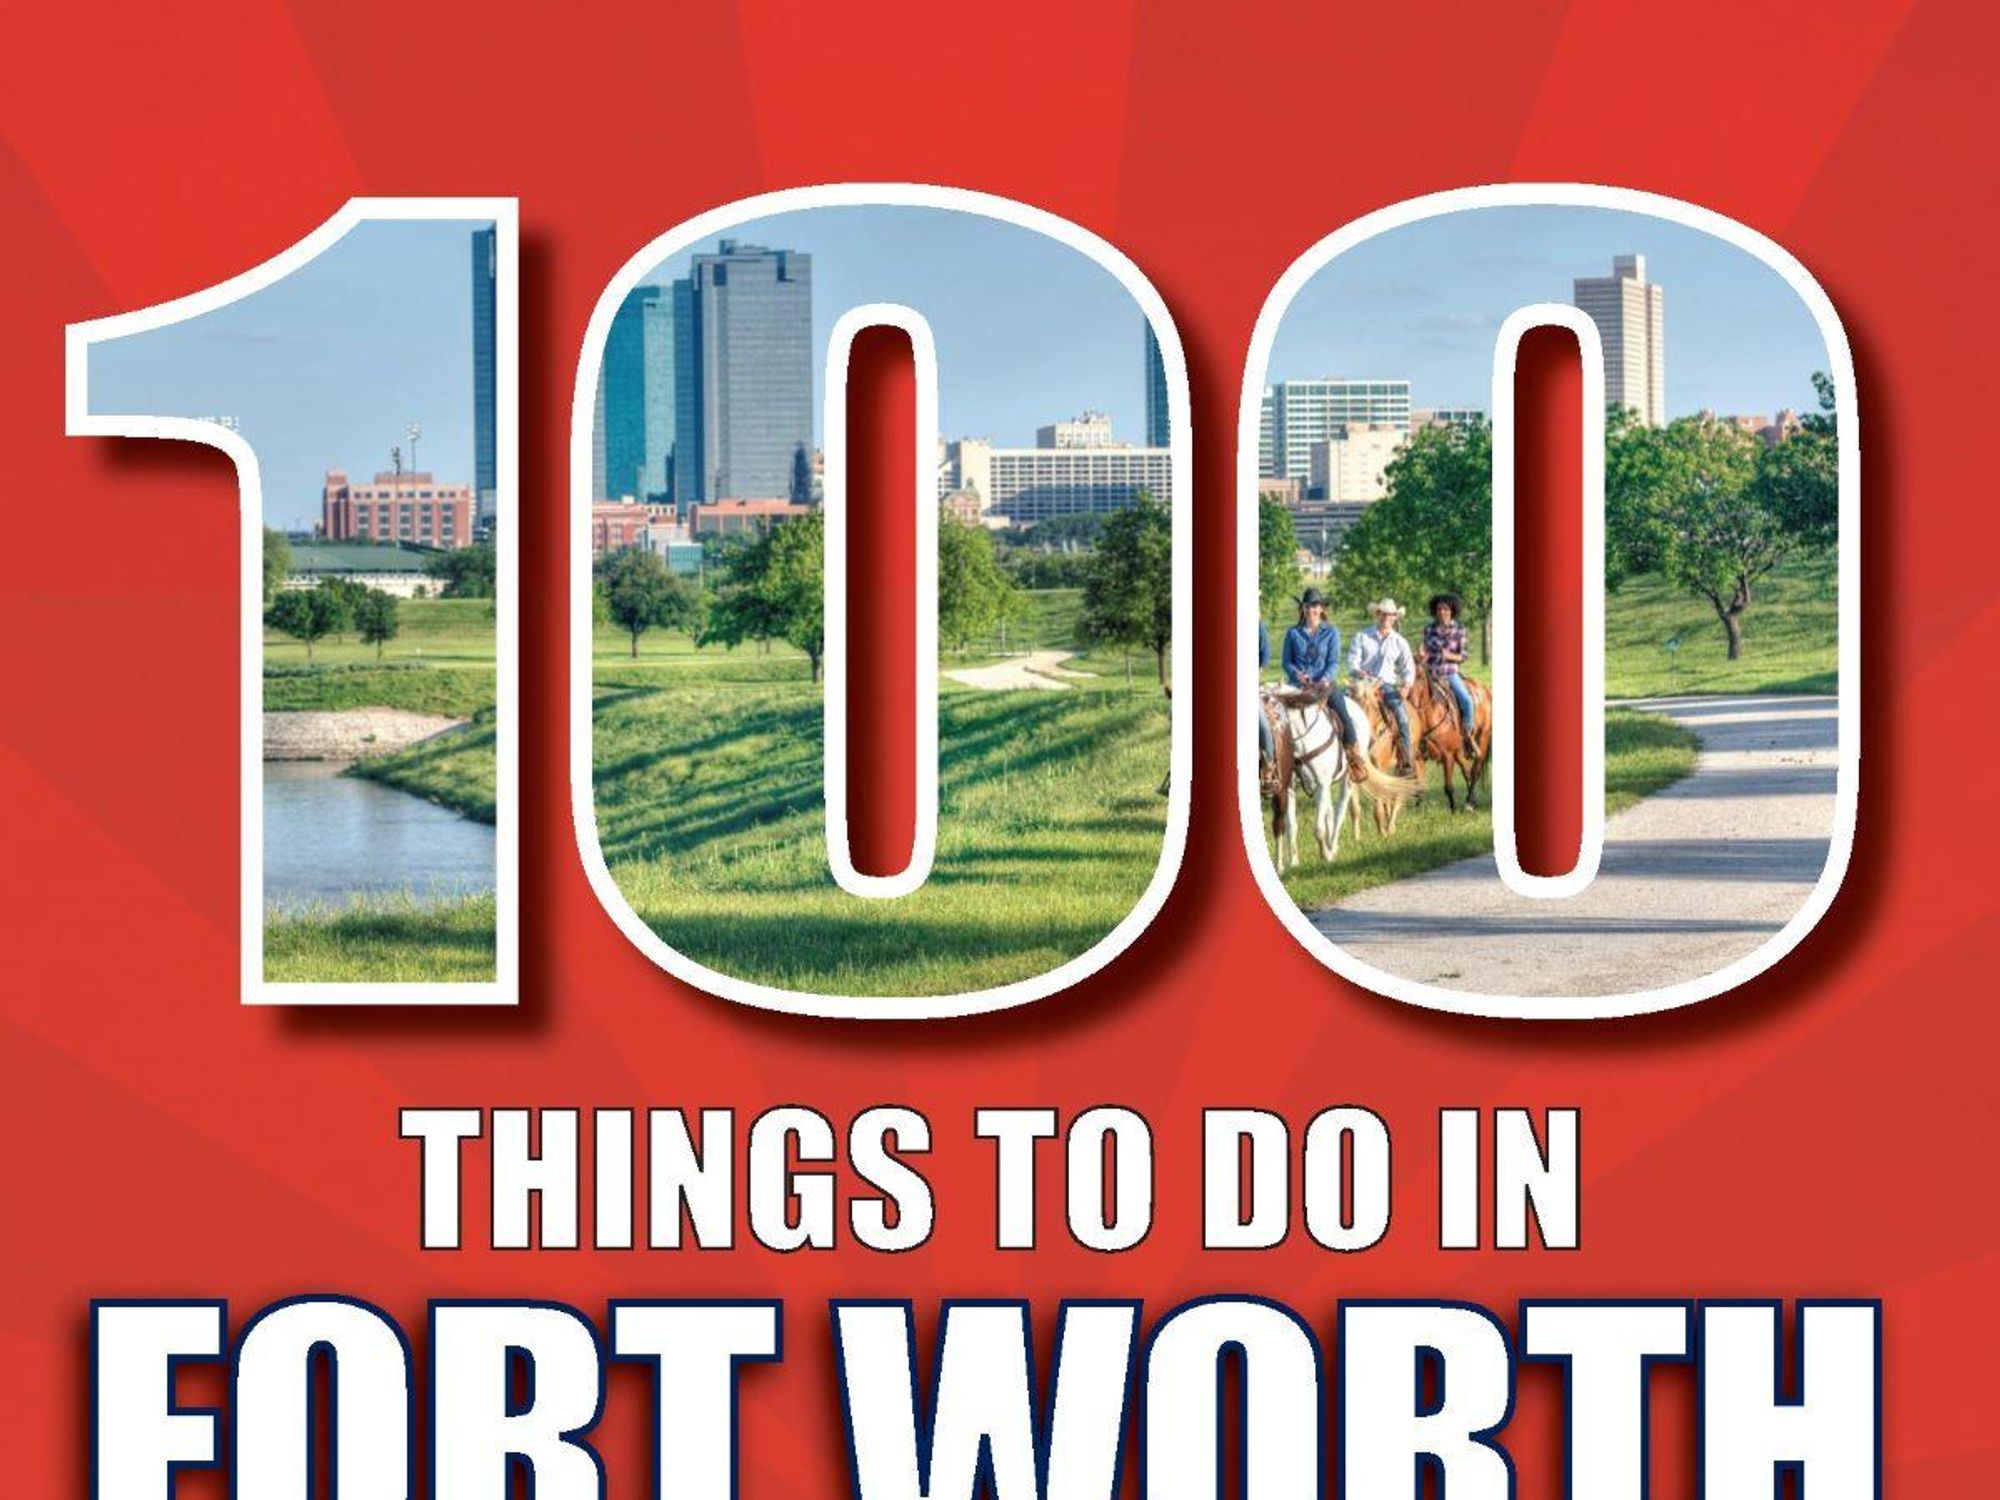 100 Things to Do in Fort Worth Before You Die front cover